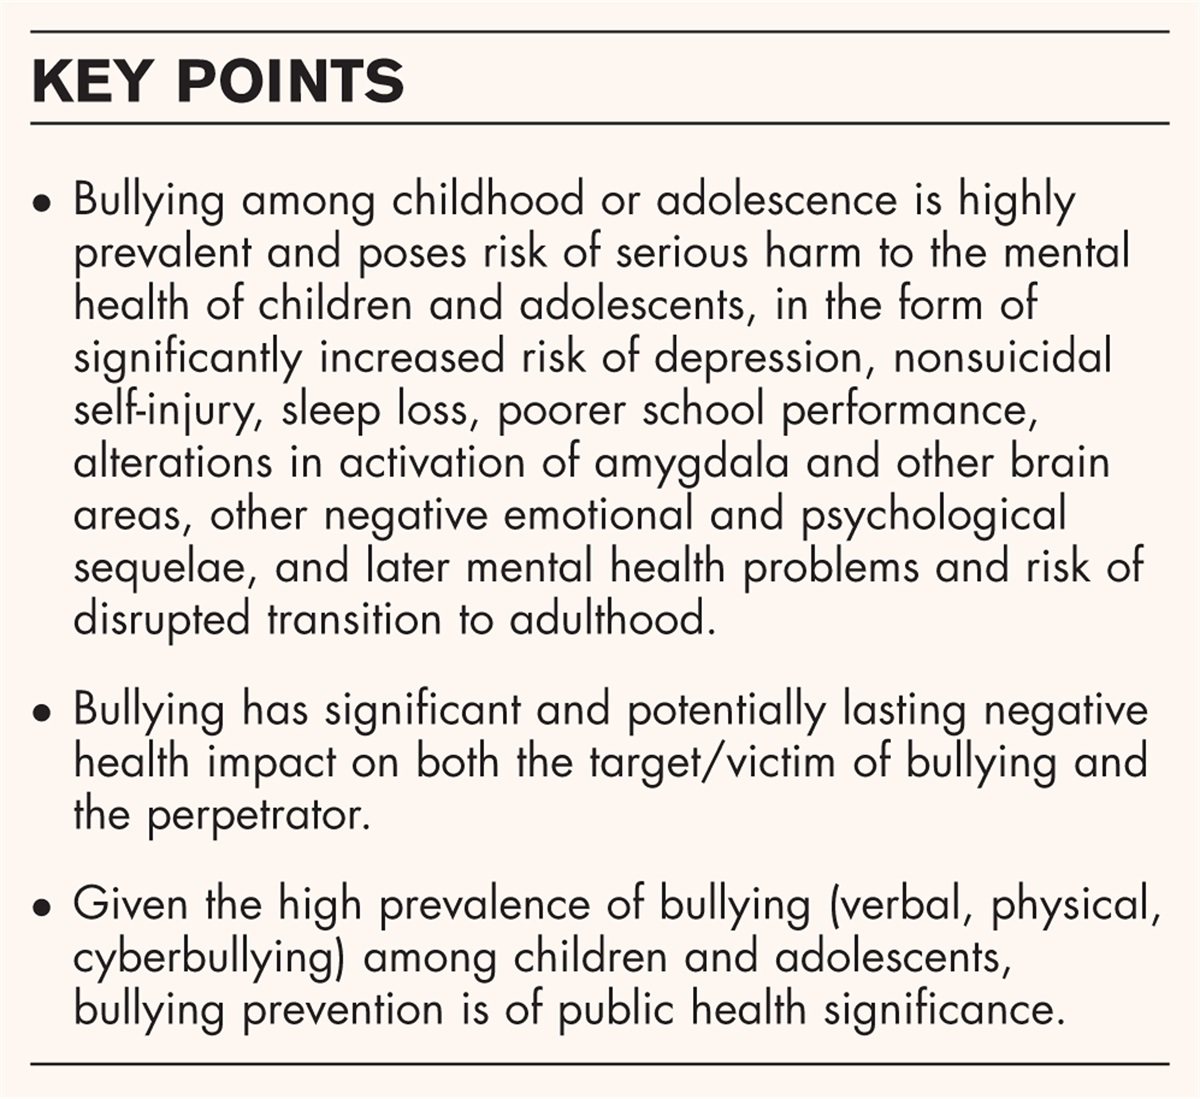 The impact of bullying in childhood and adolescence